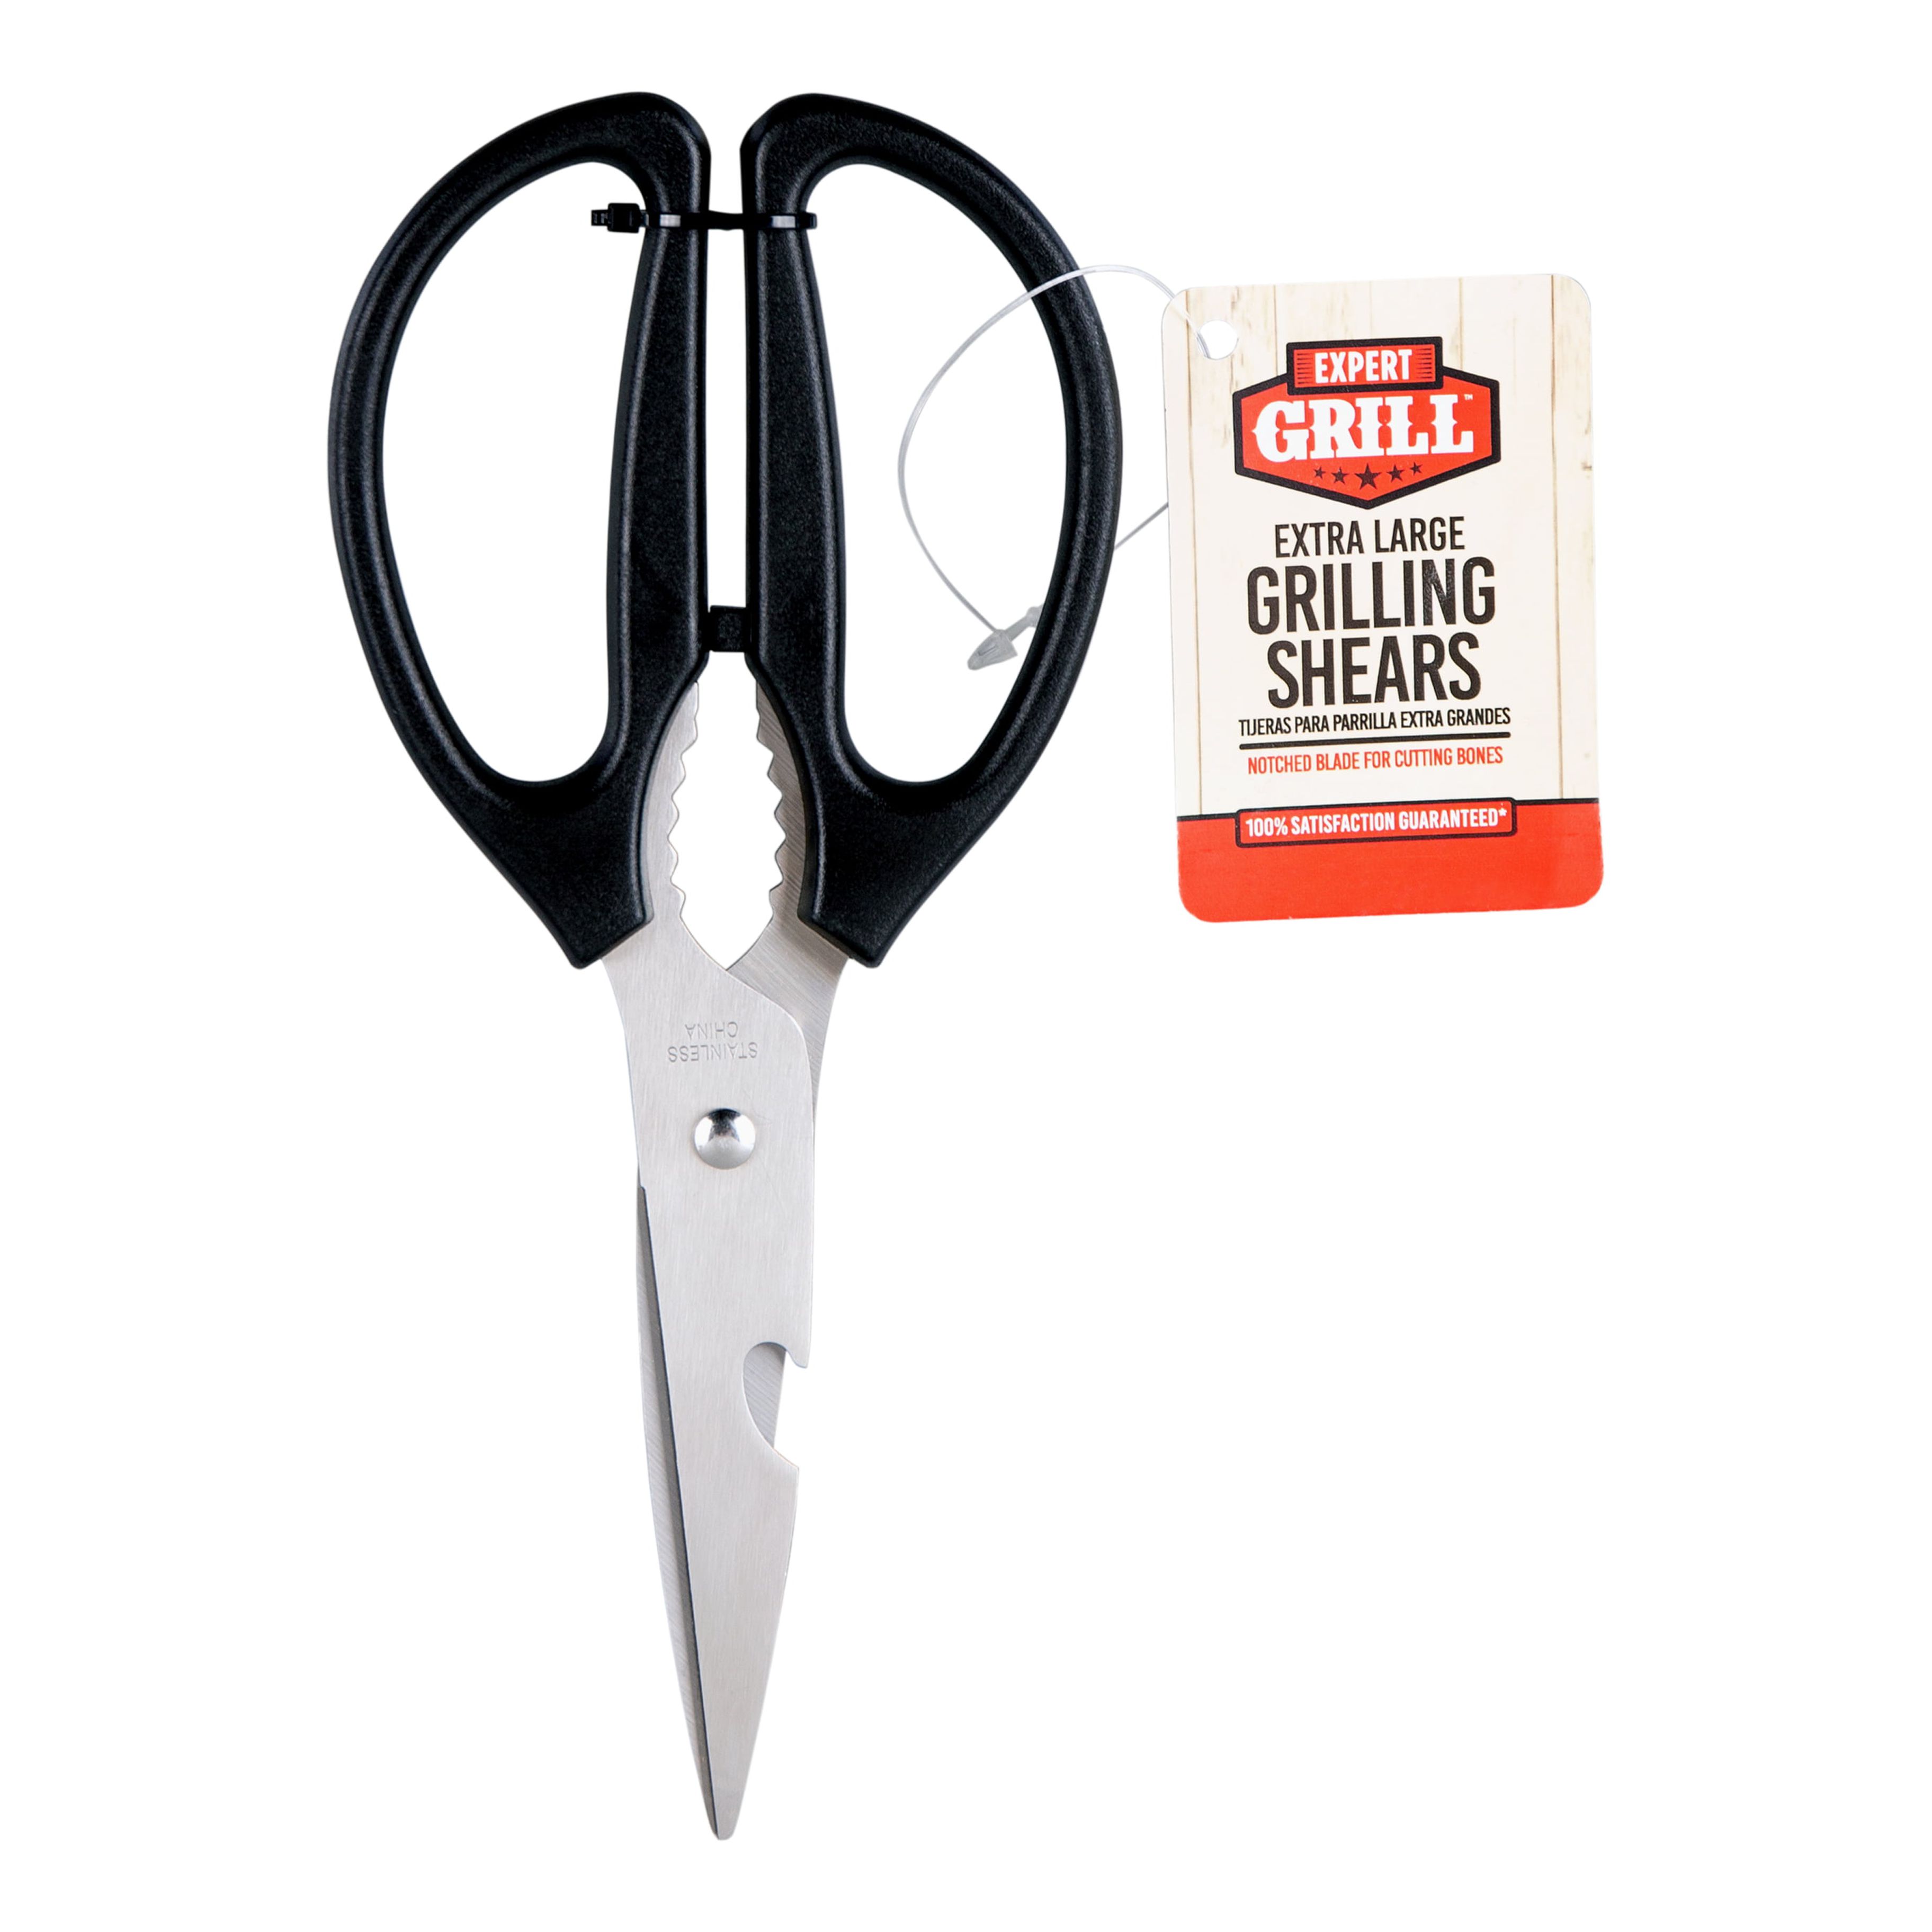 Expert Grill Extra Large Grilling and Kitchen Steel Shears - image 1 of 9